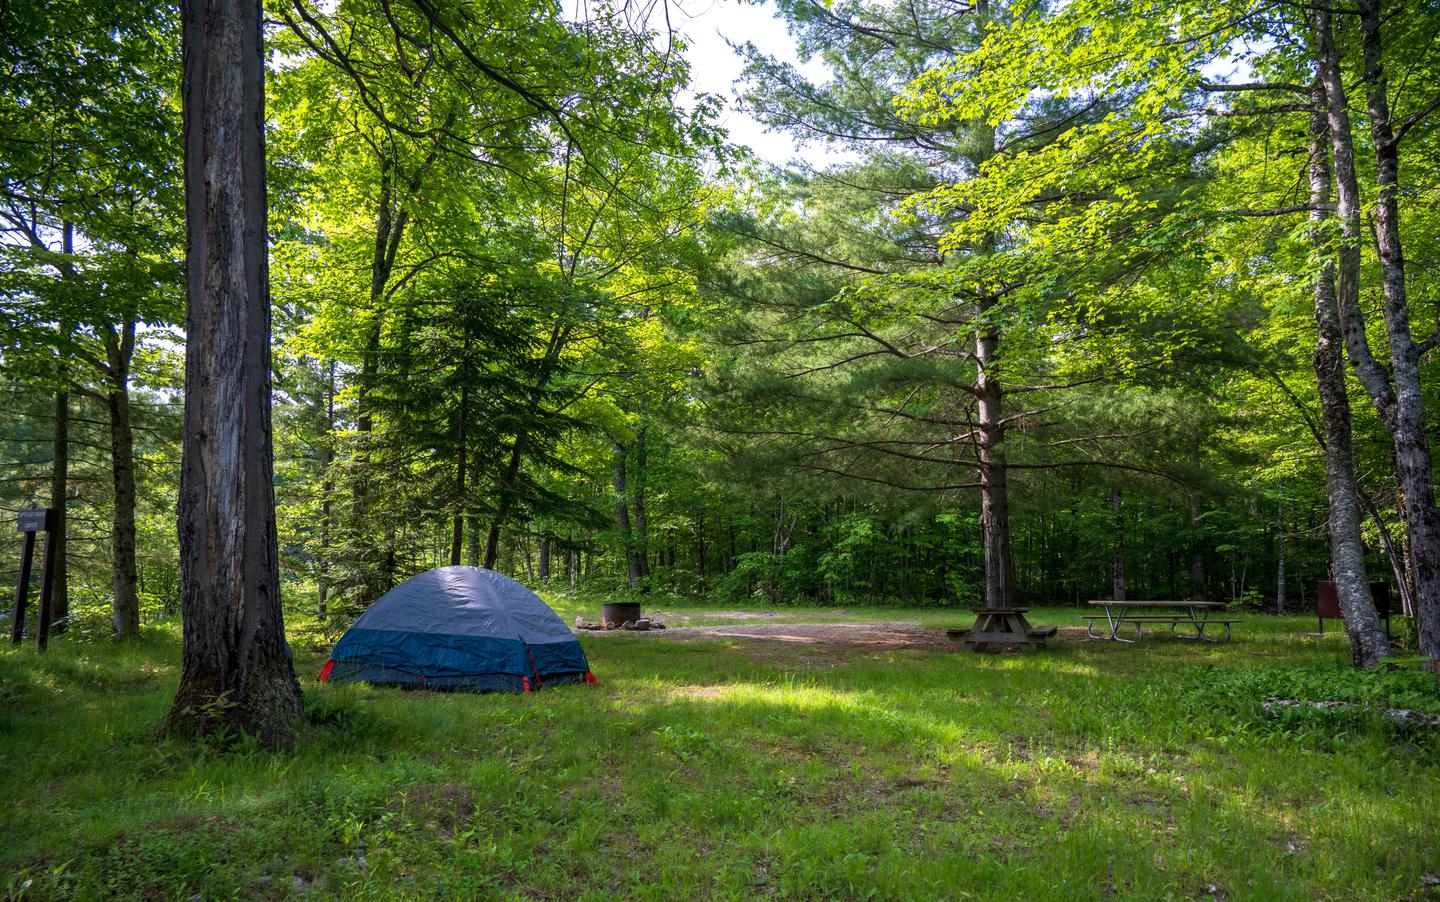 A view of Upper East Branch Campsite. The campsite is a wide and leveled with a grassy and gravel surface. A tent is set up to the left with a fire ring in front of it. Sunshine peaks down through the tall trees.Upper East Branch is a peaceful campsite in the north section of the monument.